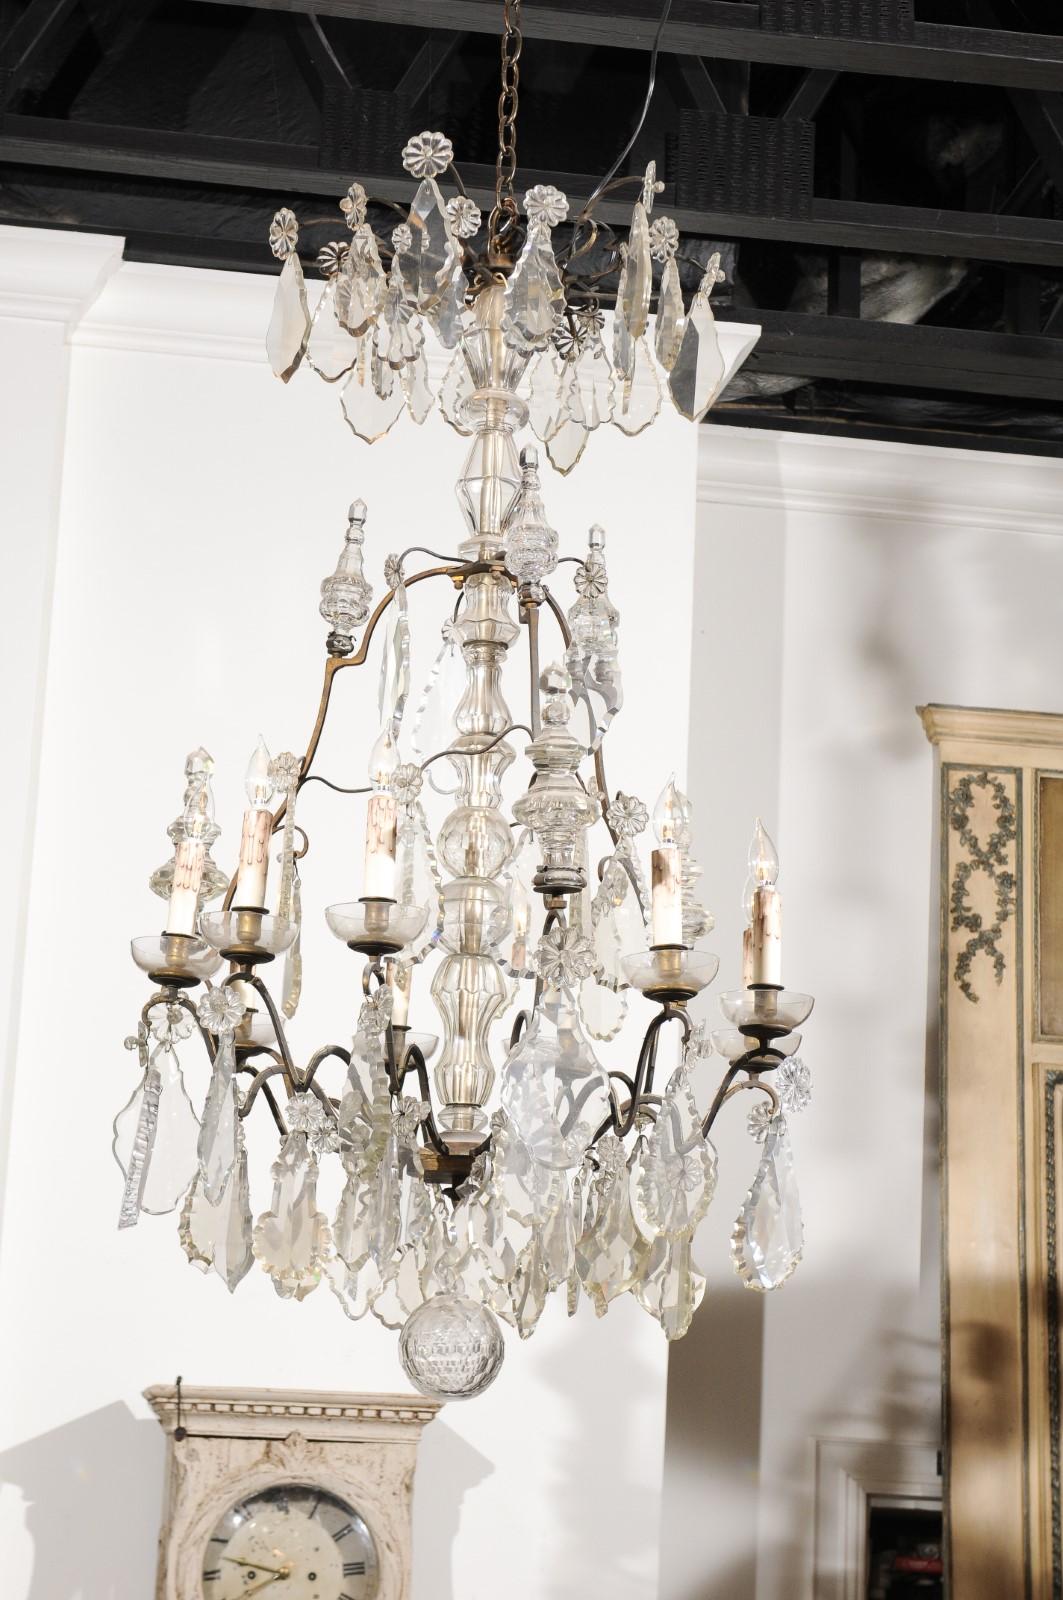 A French nine-light crystal chandelier from the mid-19th century, with iron armature. Born in France during the reign of King Louis-Philippe, this exquisite chandelier features a central crystal column, surrounded by a ring of pendeloques and